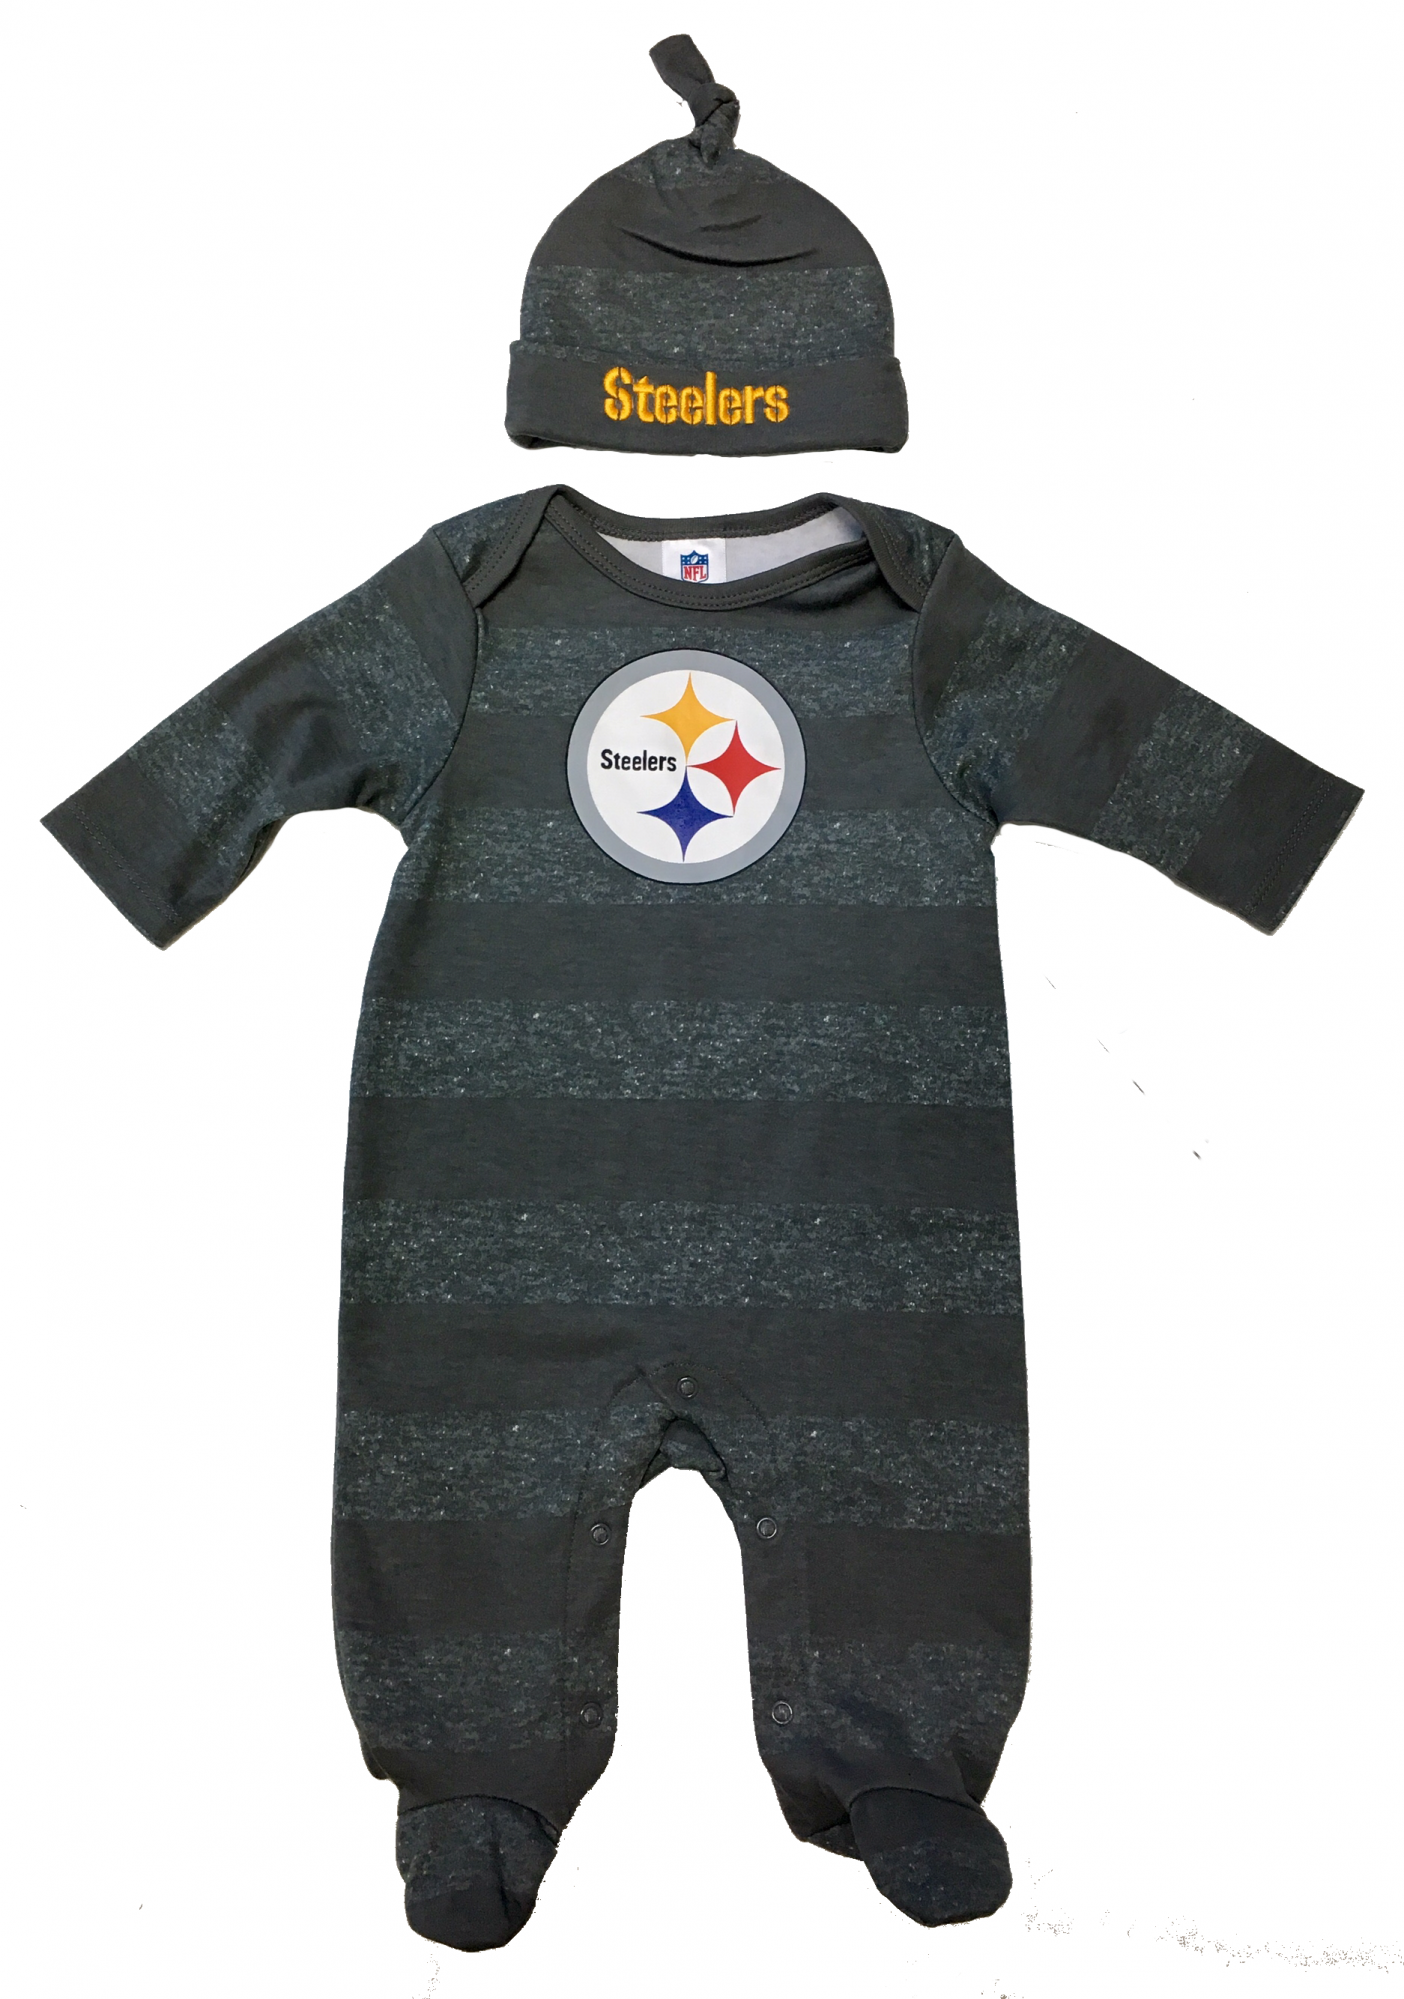 NFL-Steelers-baby-grey-striped-playsuit-and-cap-set.PNG